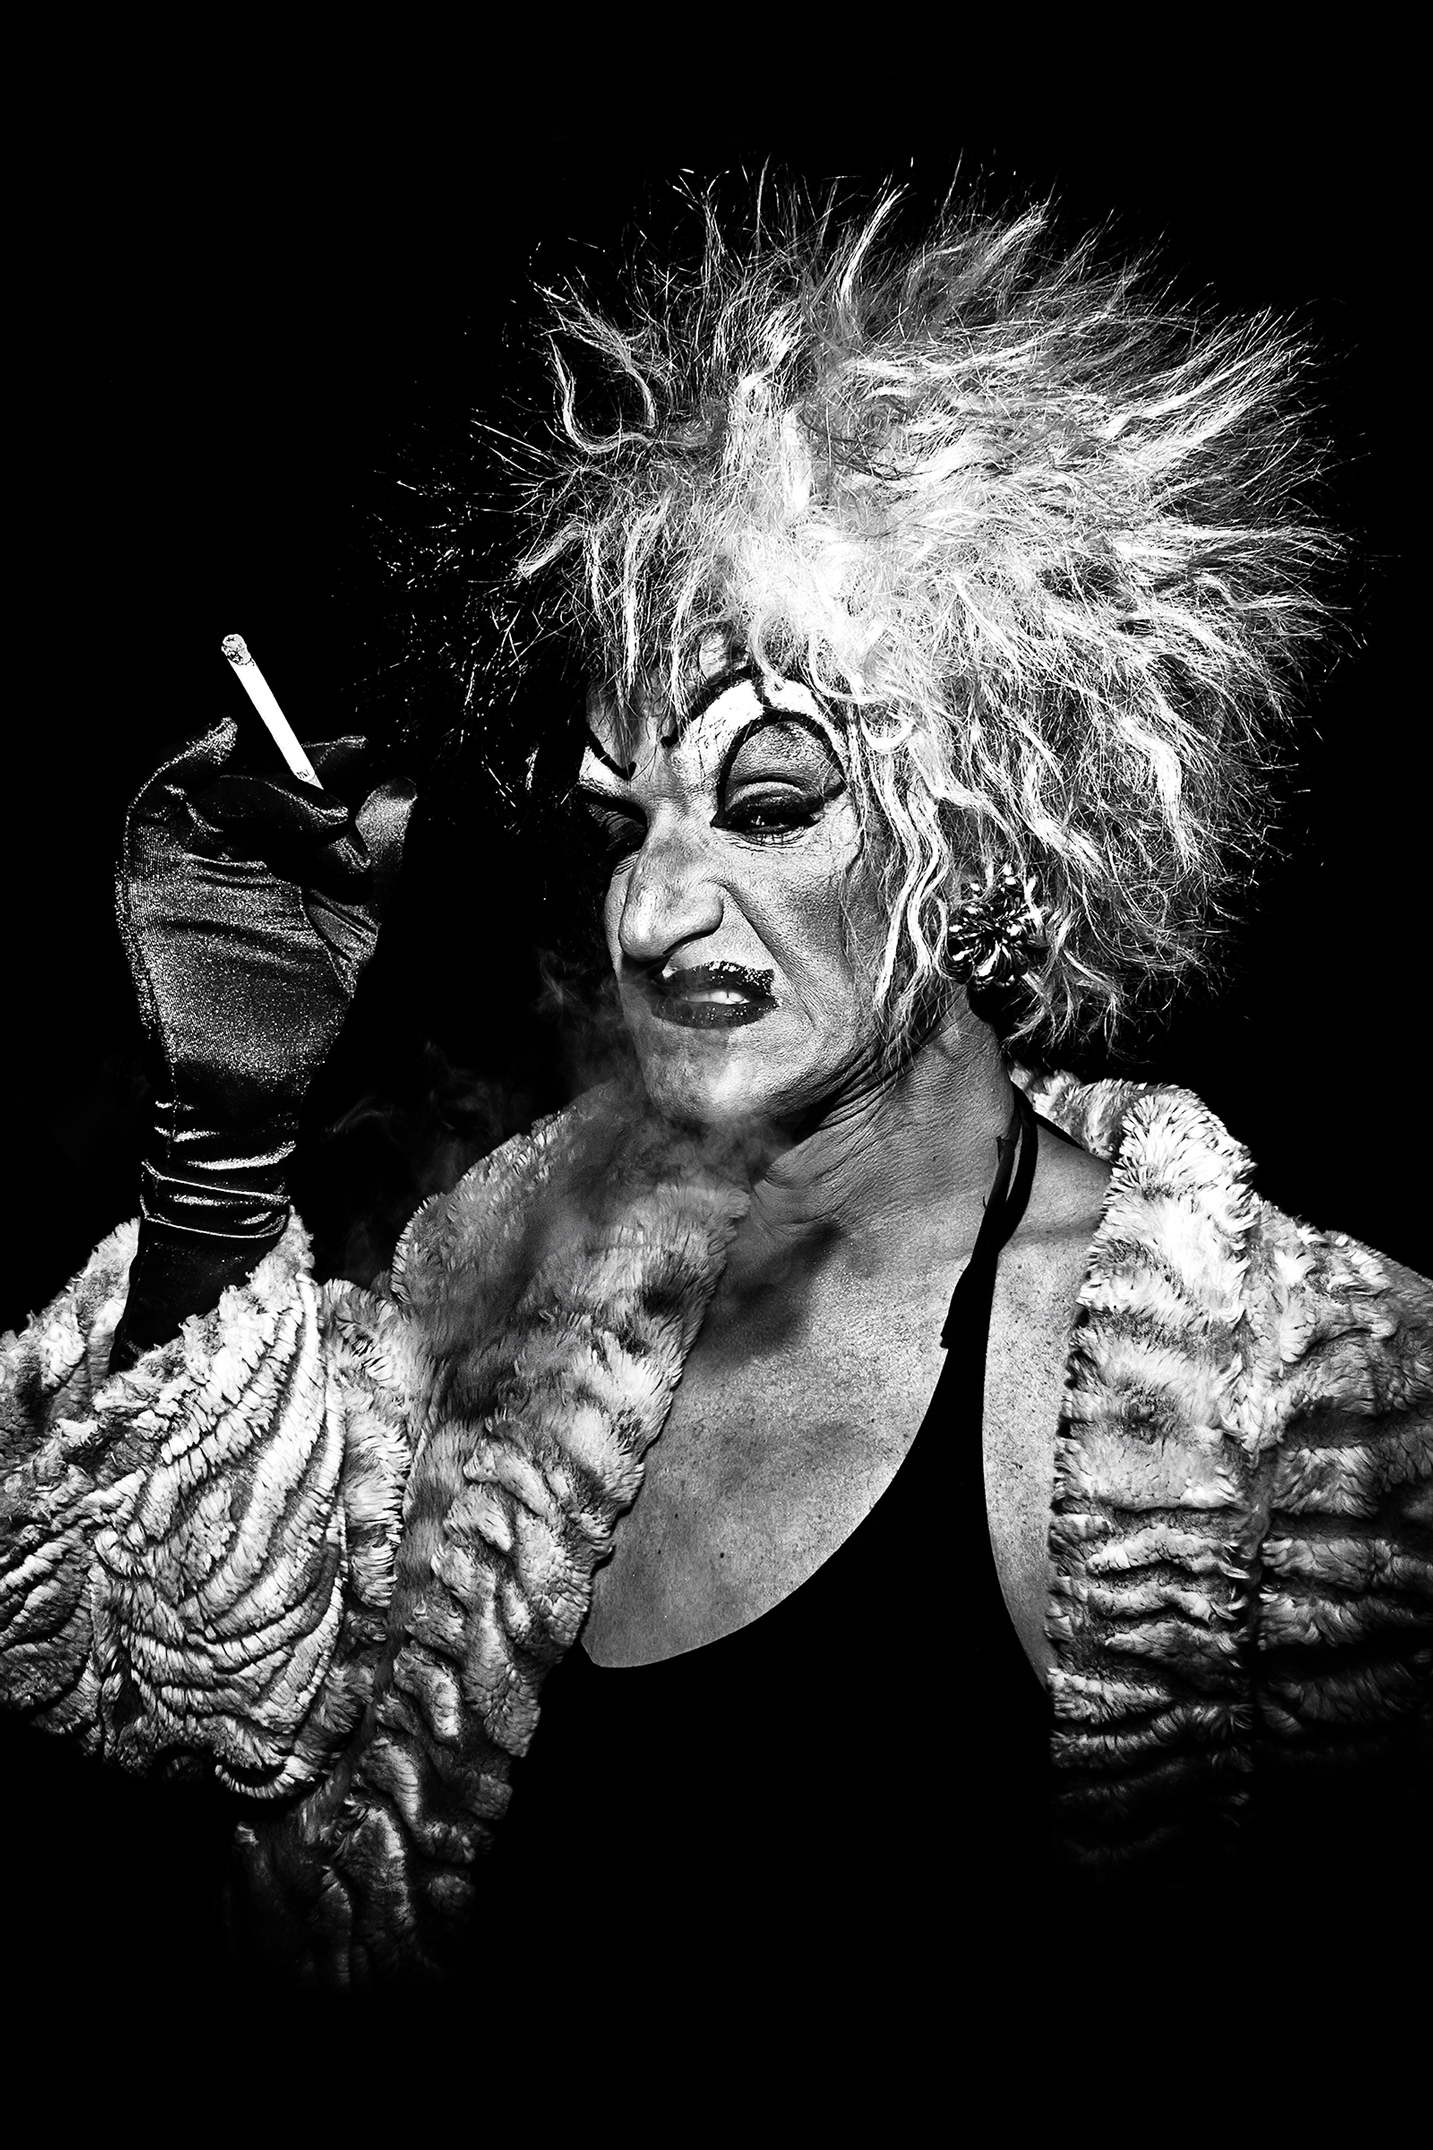 Local legend Mark "Mom" Finley drags on a cigarette while dressed as Cruella de Vil outside Baltic Room on February 24th, 2012, in Seattle.